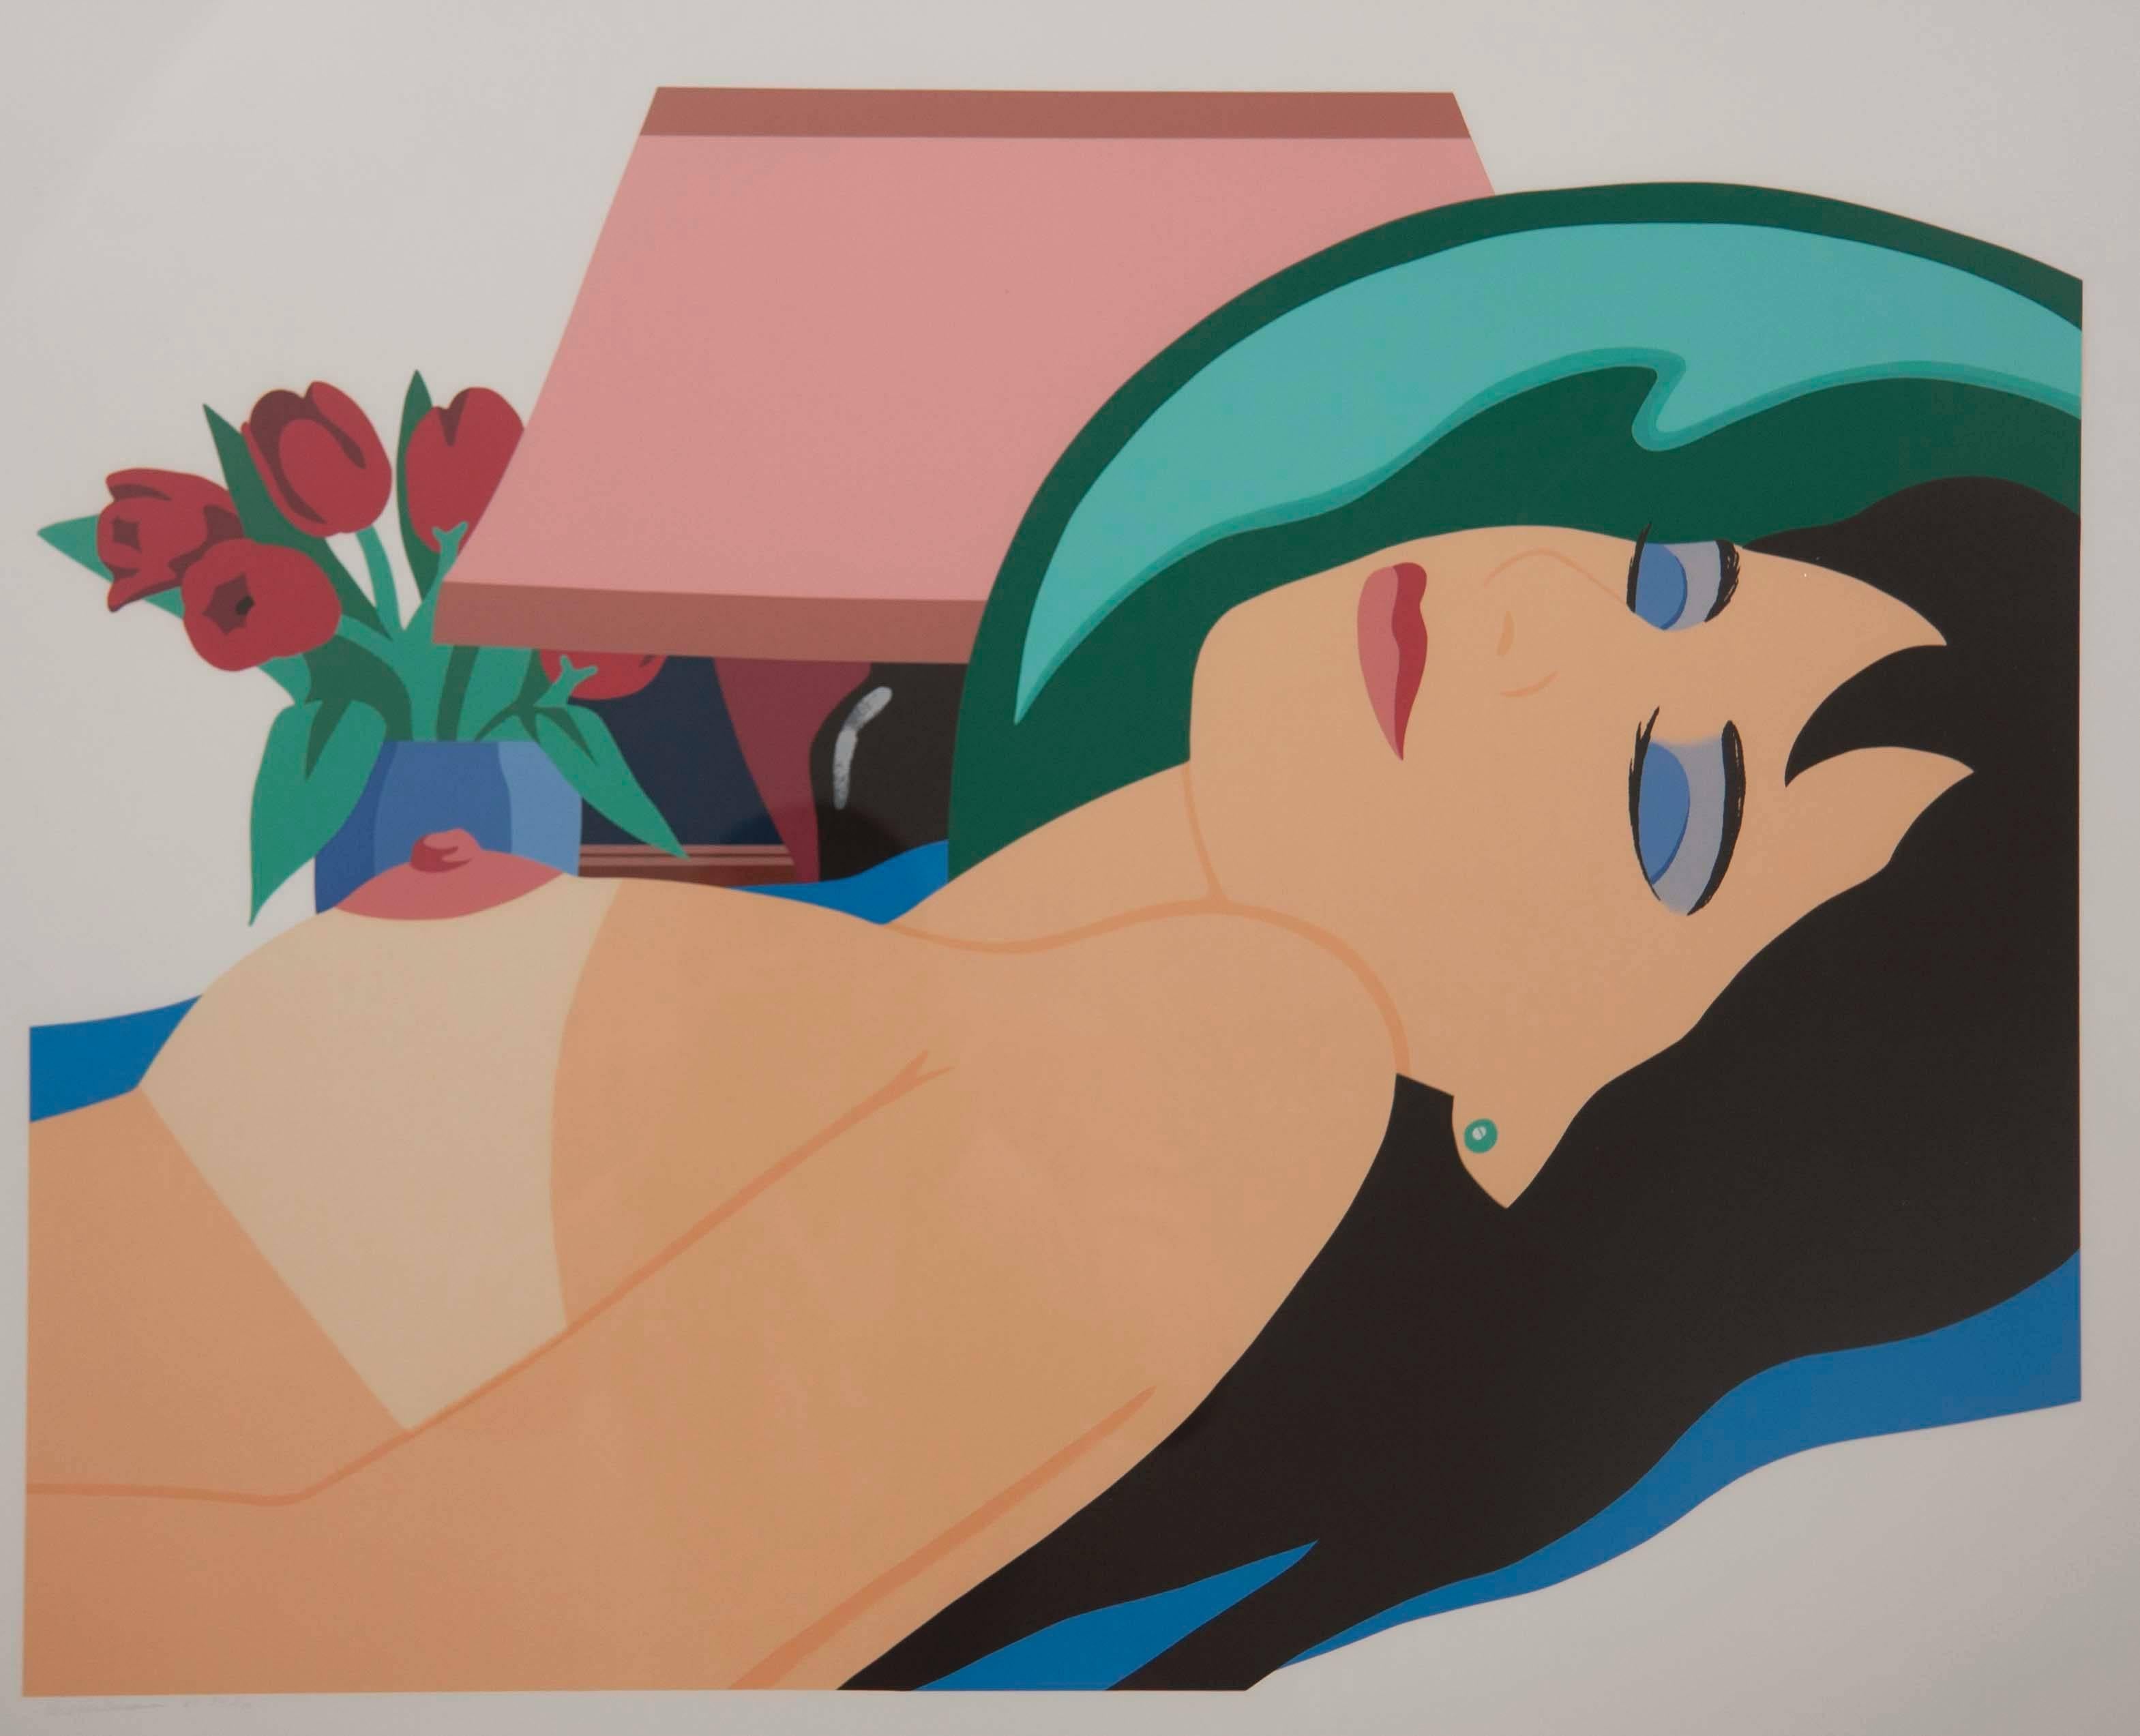 A Tom Wesselmann screen print on Arches 88 paper. Titled 